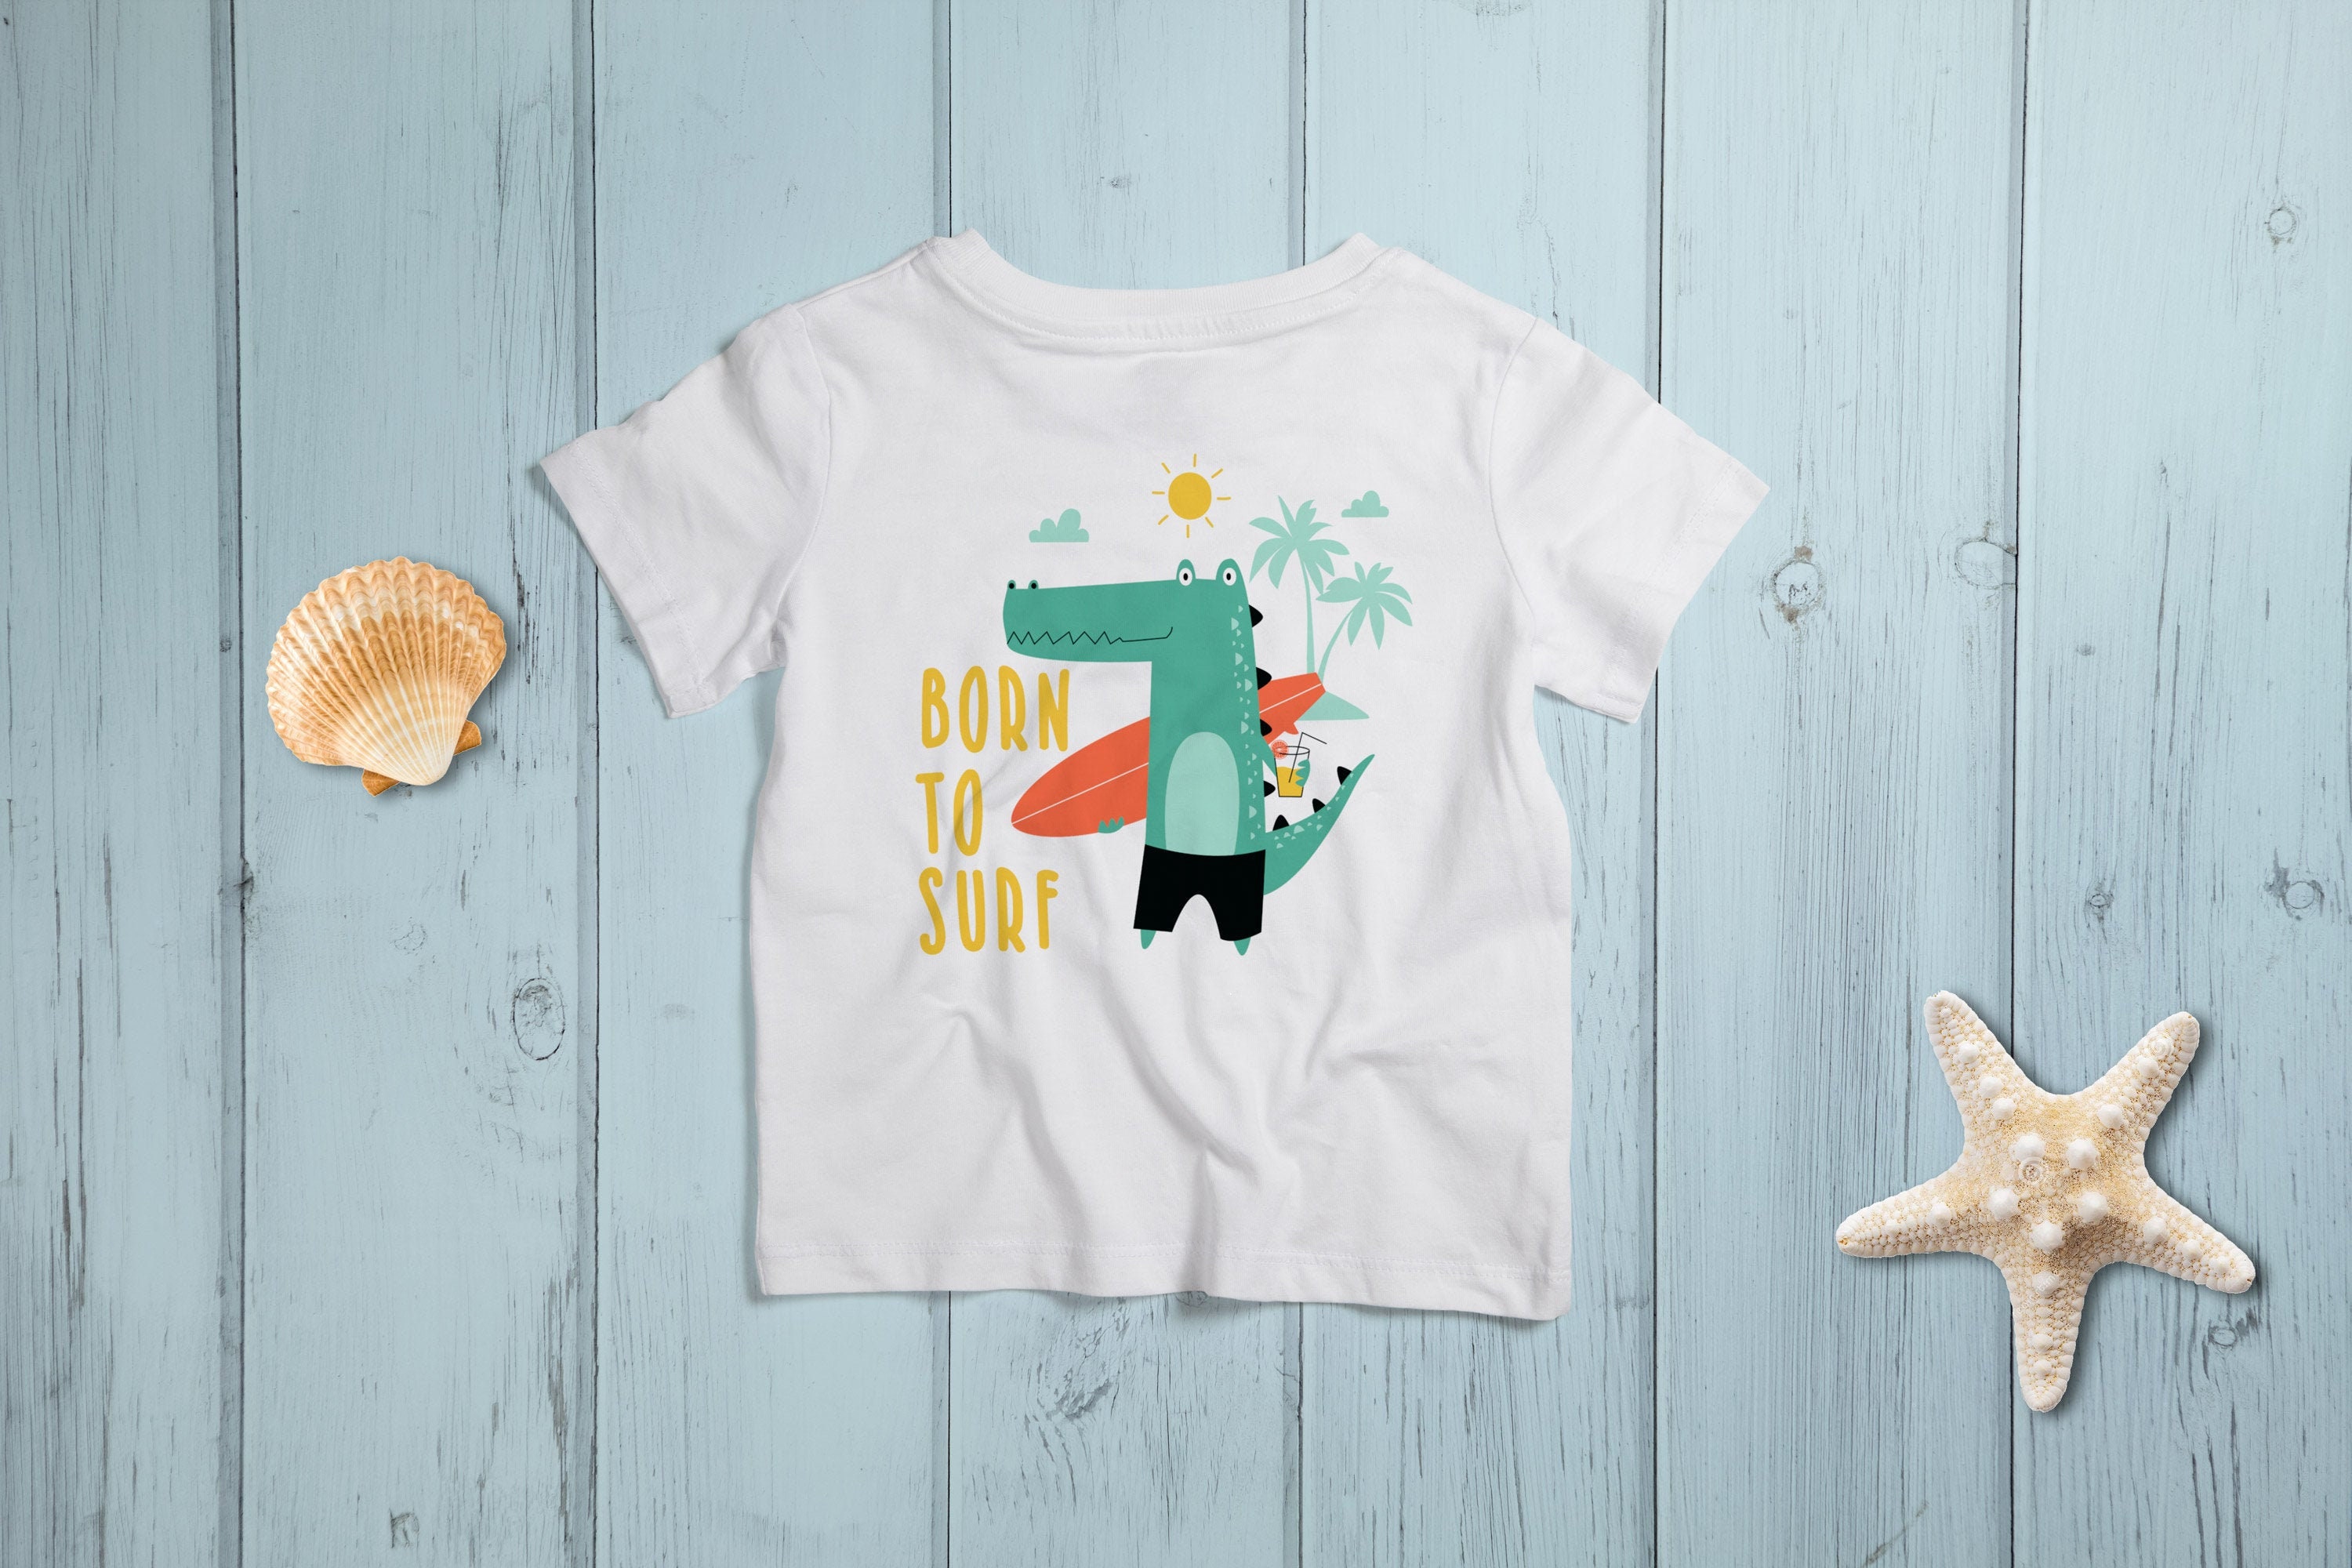 Baby/toddler T-shirt to Surf Etsy